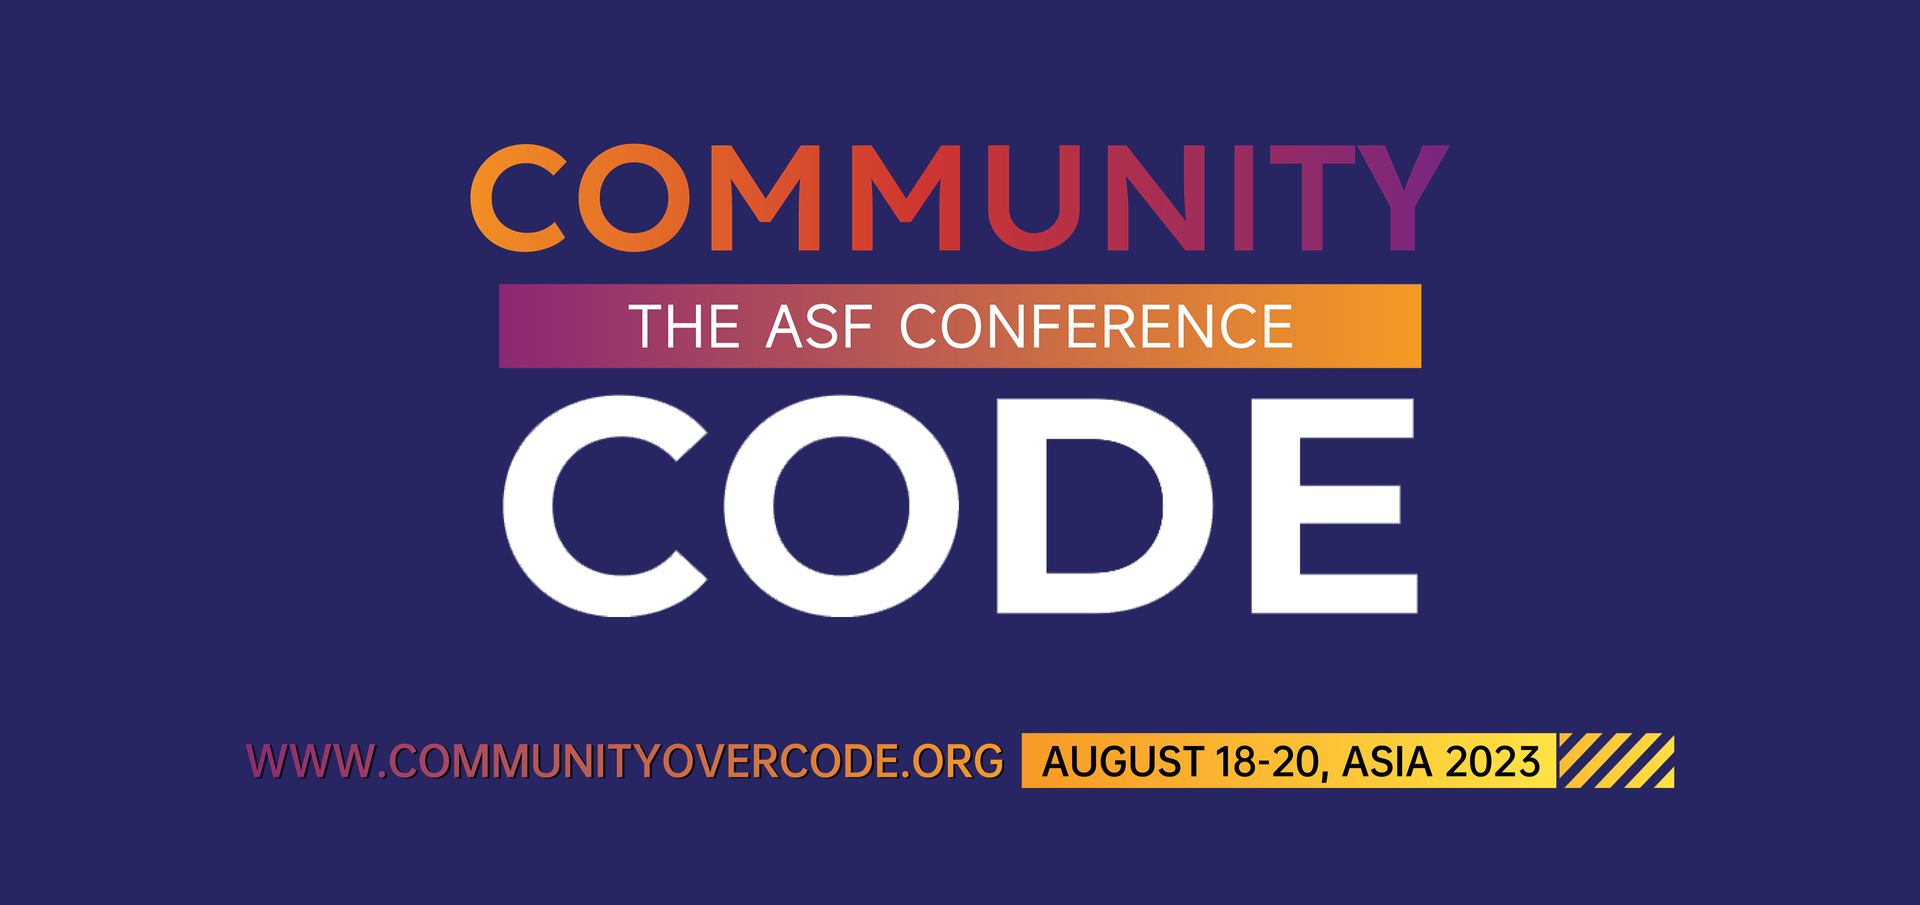 CommunityOverCode - The ASF Conference Asia 2023